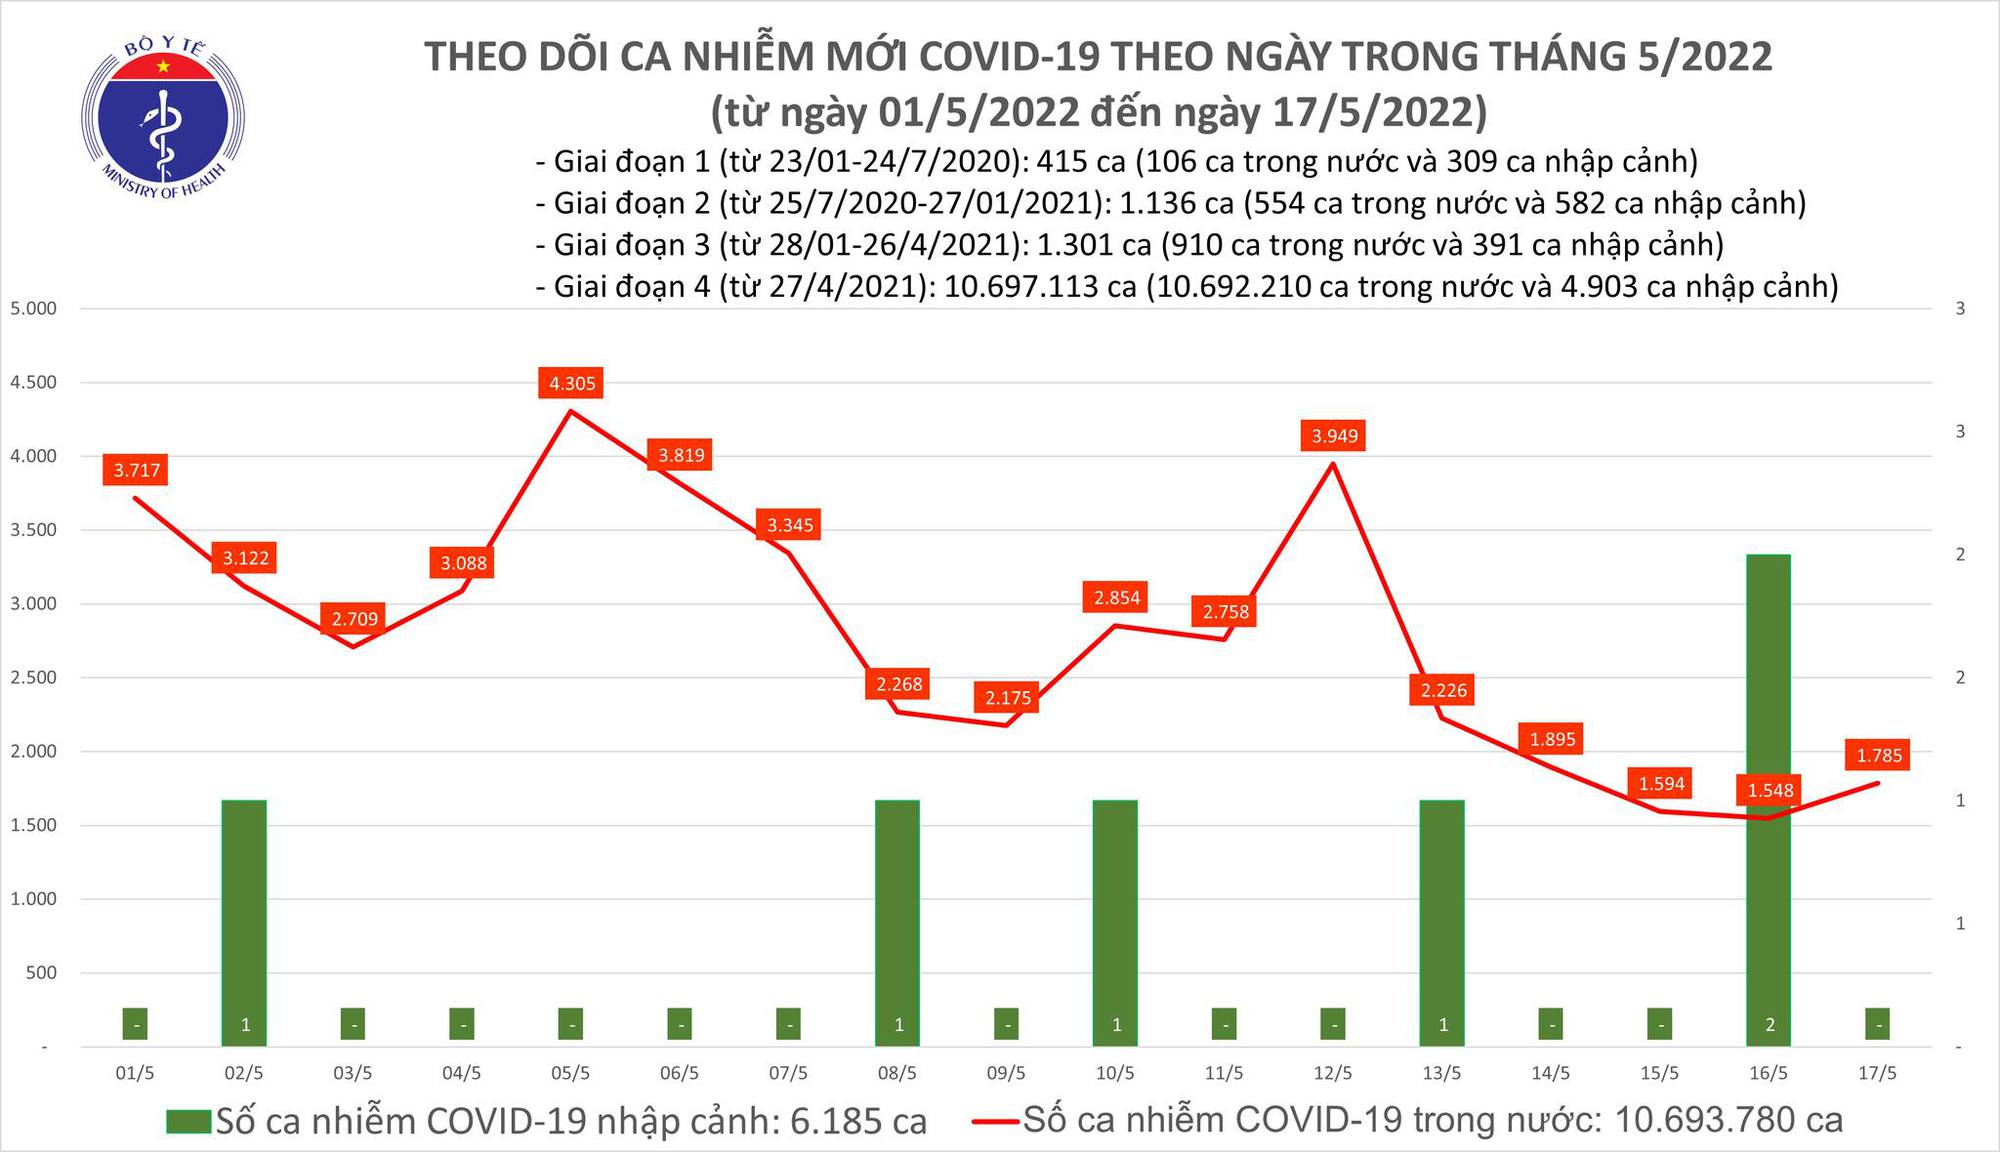 Covid-19 on May 17: Nearly 1,800 new cases and 4 deaths - Photo 1.